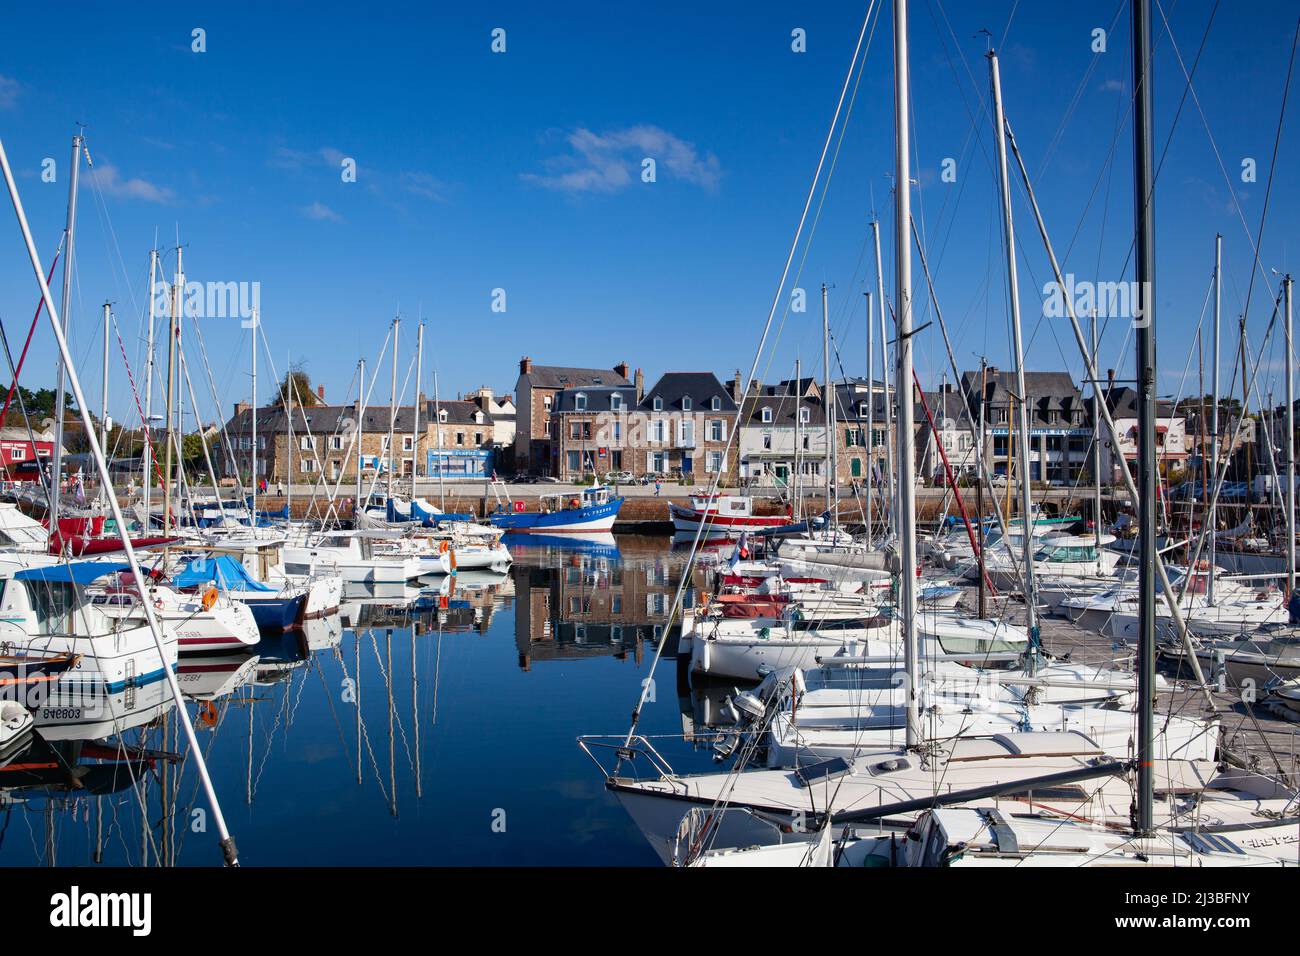 Paimpol,France - 17 October, 2021: Yacht harbour in Paimpol, France.Paimpol is a commune in the Cotes-d Armor department in Brittany in northwest Fran Stock Photo